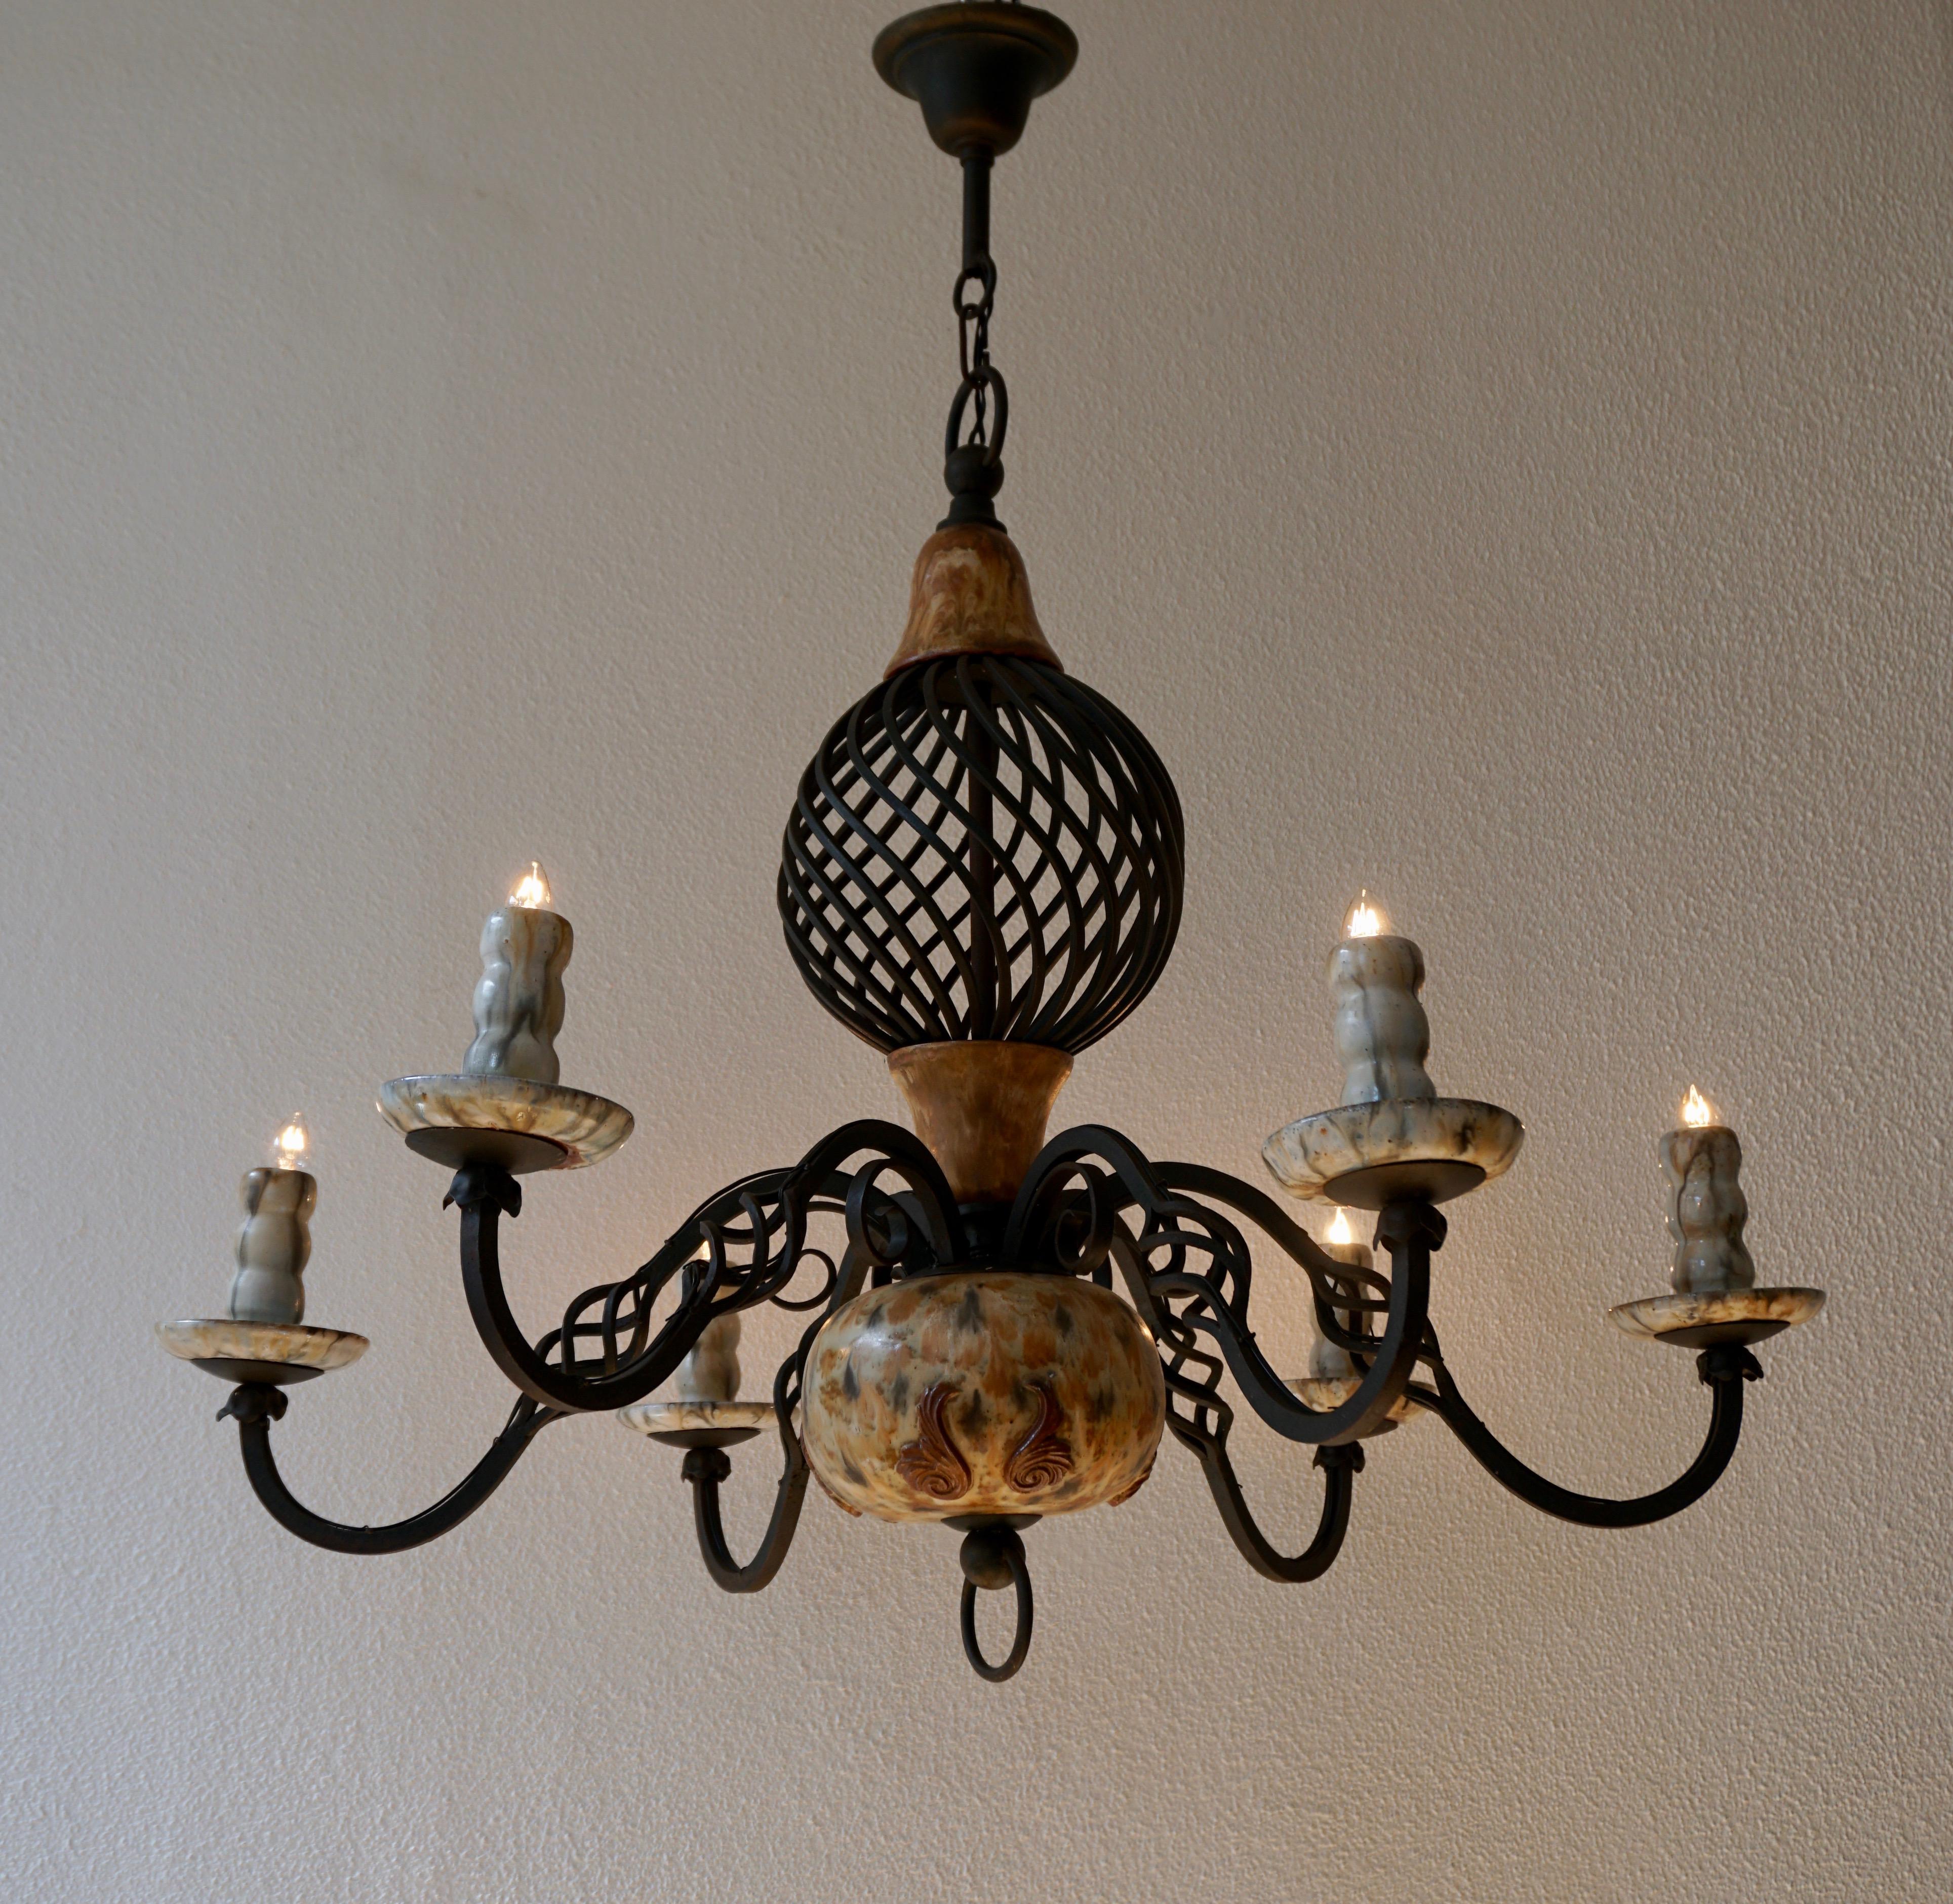 Rare ceramic and wrought iron chandelier by Antoine Dubois,Belgium.
Diameter 90 cm - height fixture 76 cm - total height 96 cm - weight 10 kg.

13 generations of this family have been around since the 1960s
actively engaged in: turning, pouring,